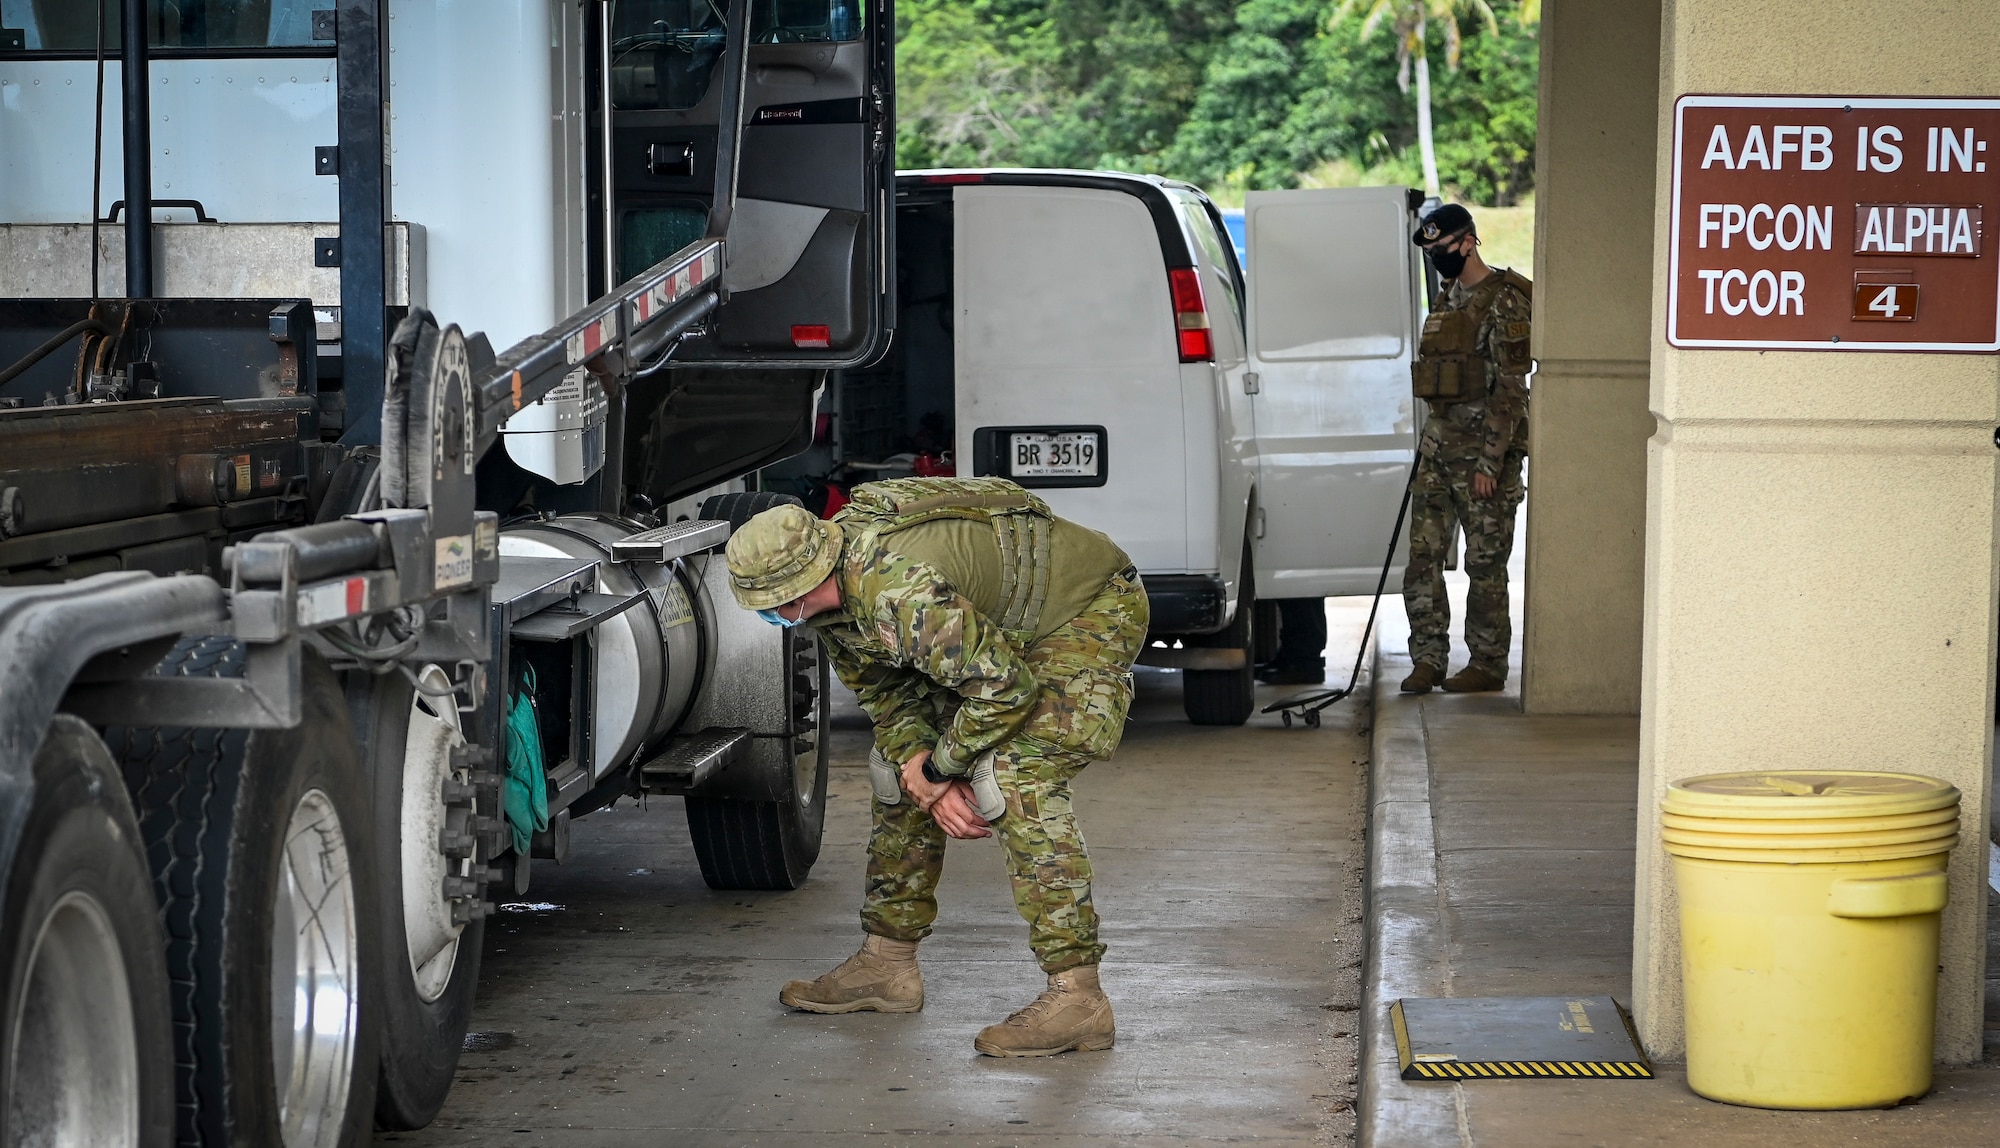 U.S. Air Force and Royal Australian Air Force personnel search vehicles at the vehicle inspection facility during Cope North 22 on Andersen Air Force Base, Guam, Feb. 15, 2022.